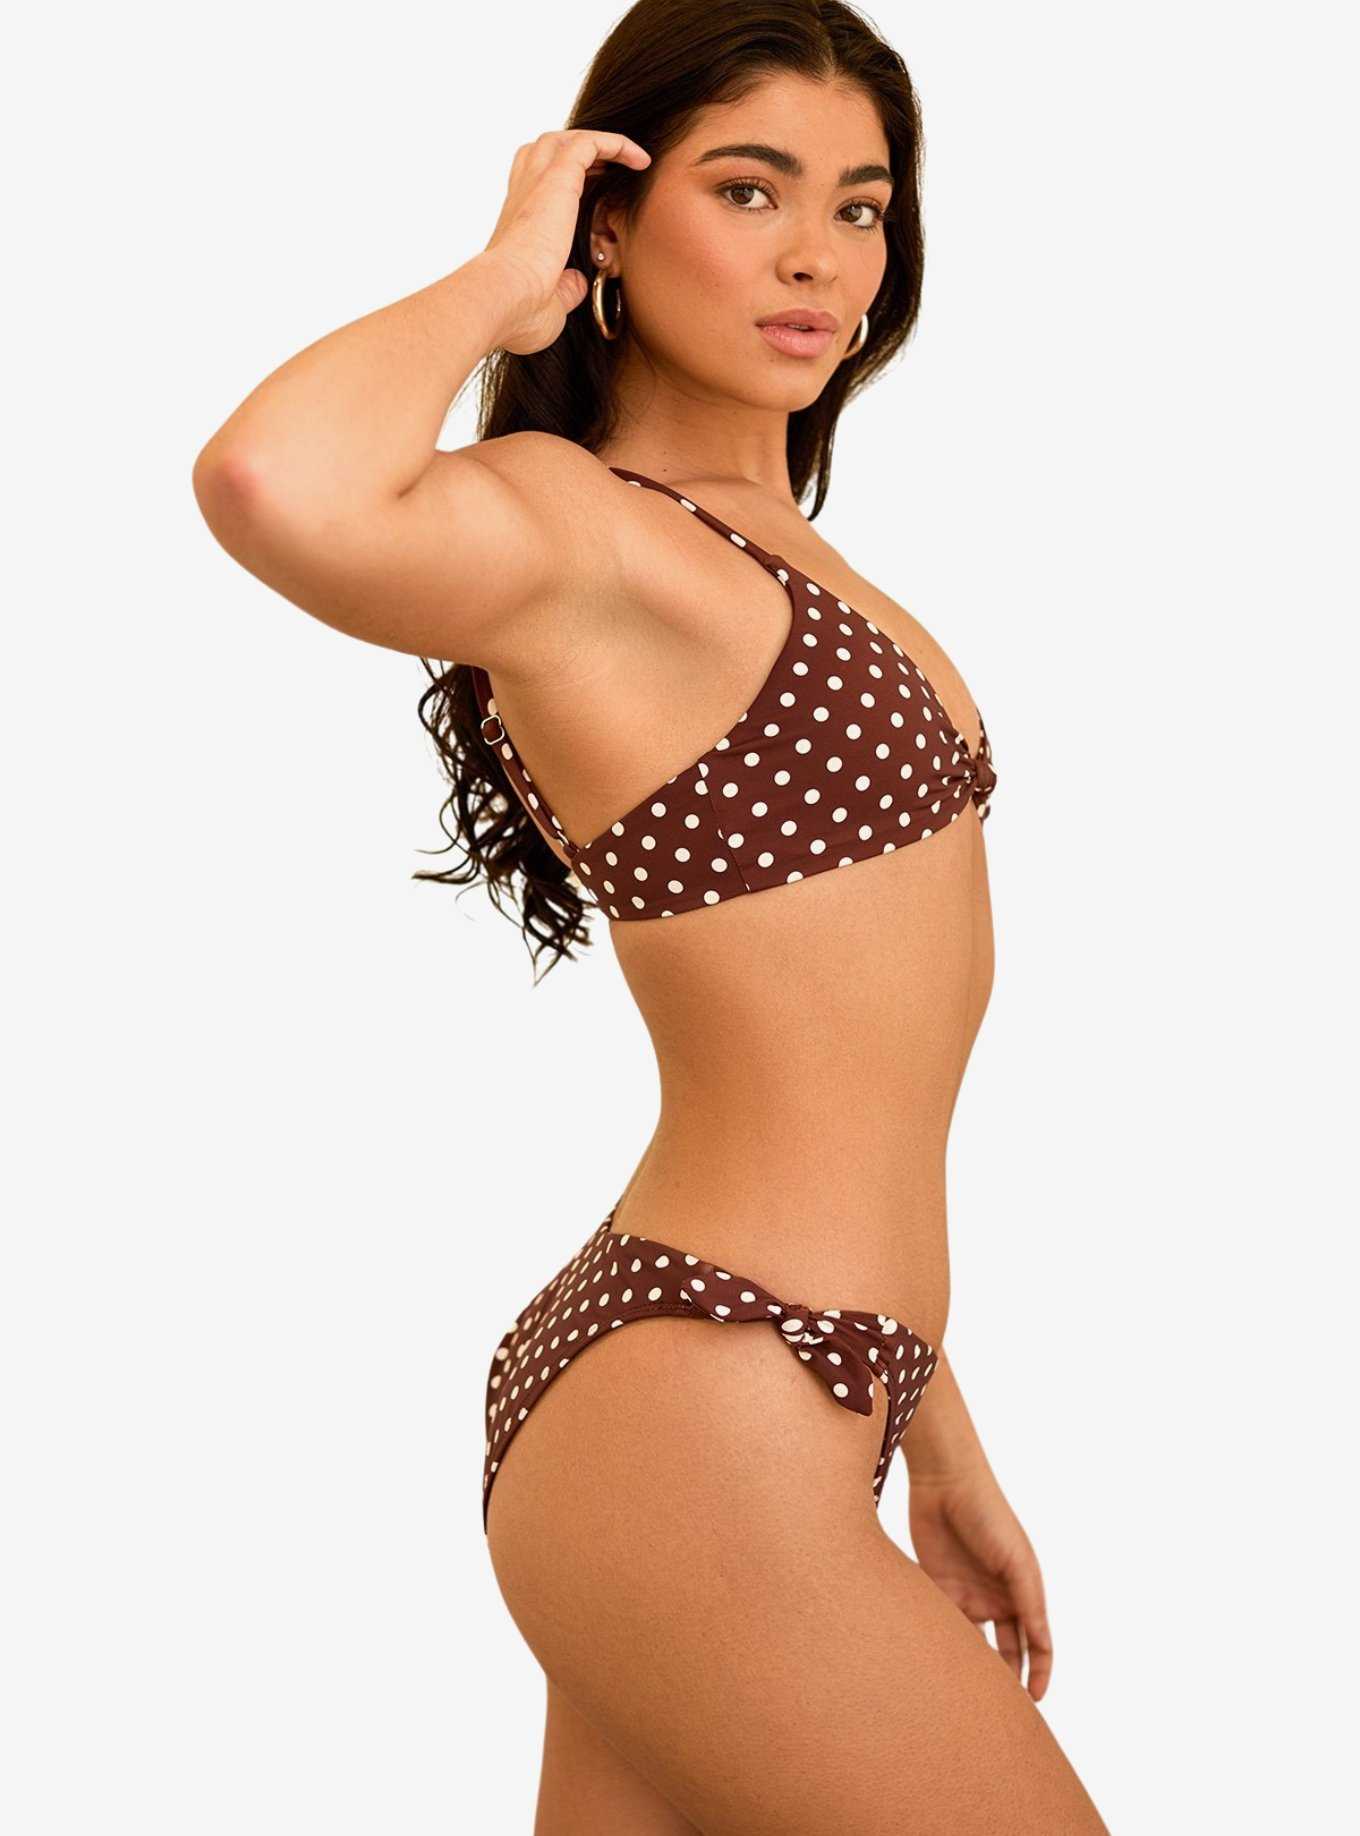 Dippin' Daisy's Zen Knotted Triangle Swim Top Dotted Brown, , hi-res